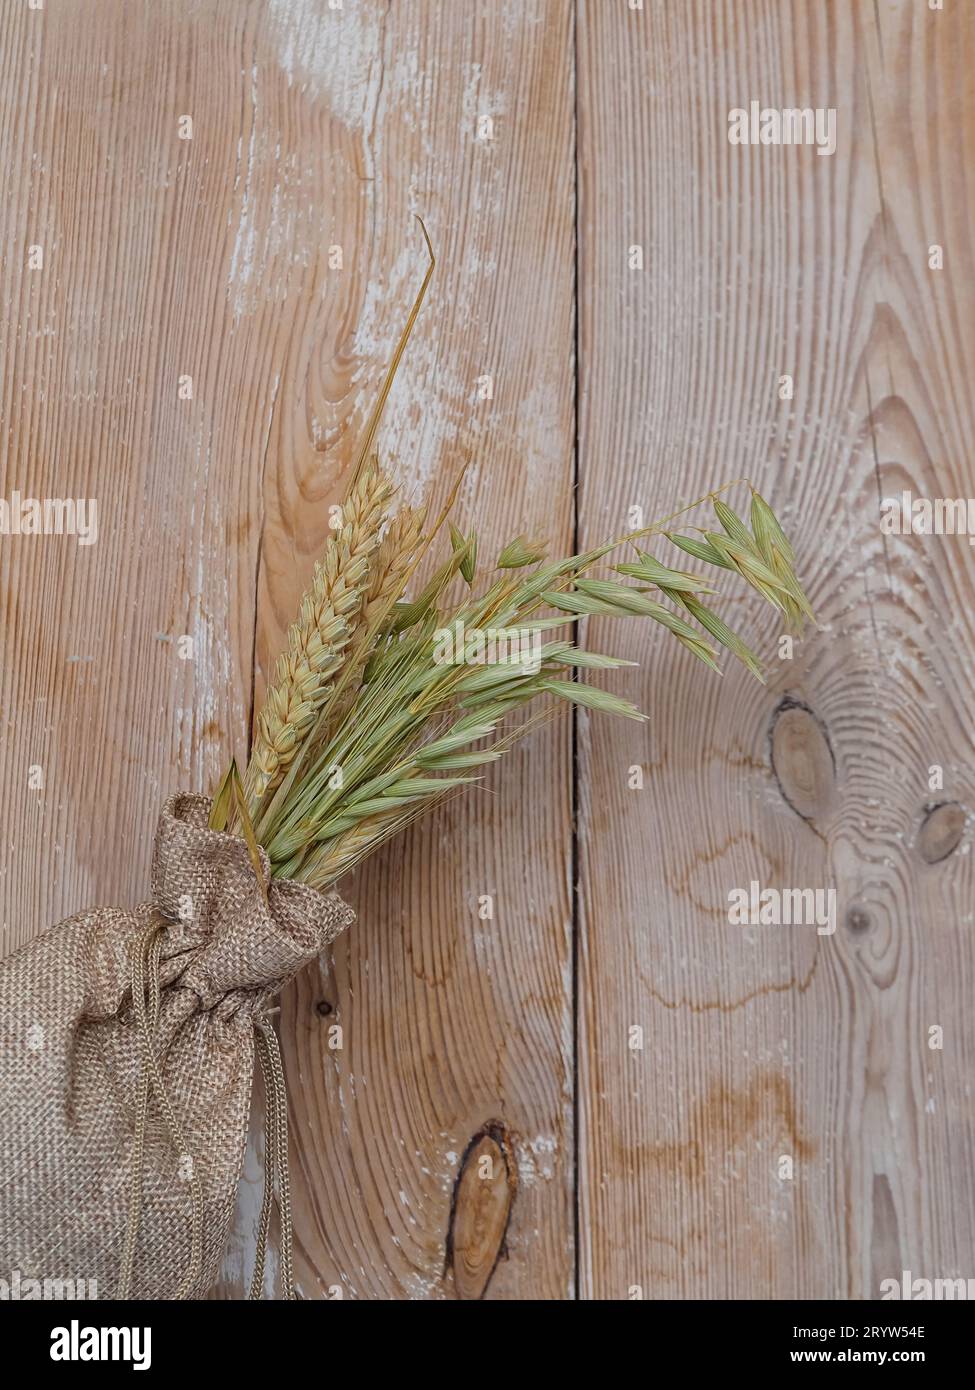 ears of grain sticking out of a linen bag, a symbol of fertility and abundant harvests, an element of naturalness and simplicity. The boards give the Stock Photo